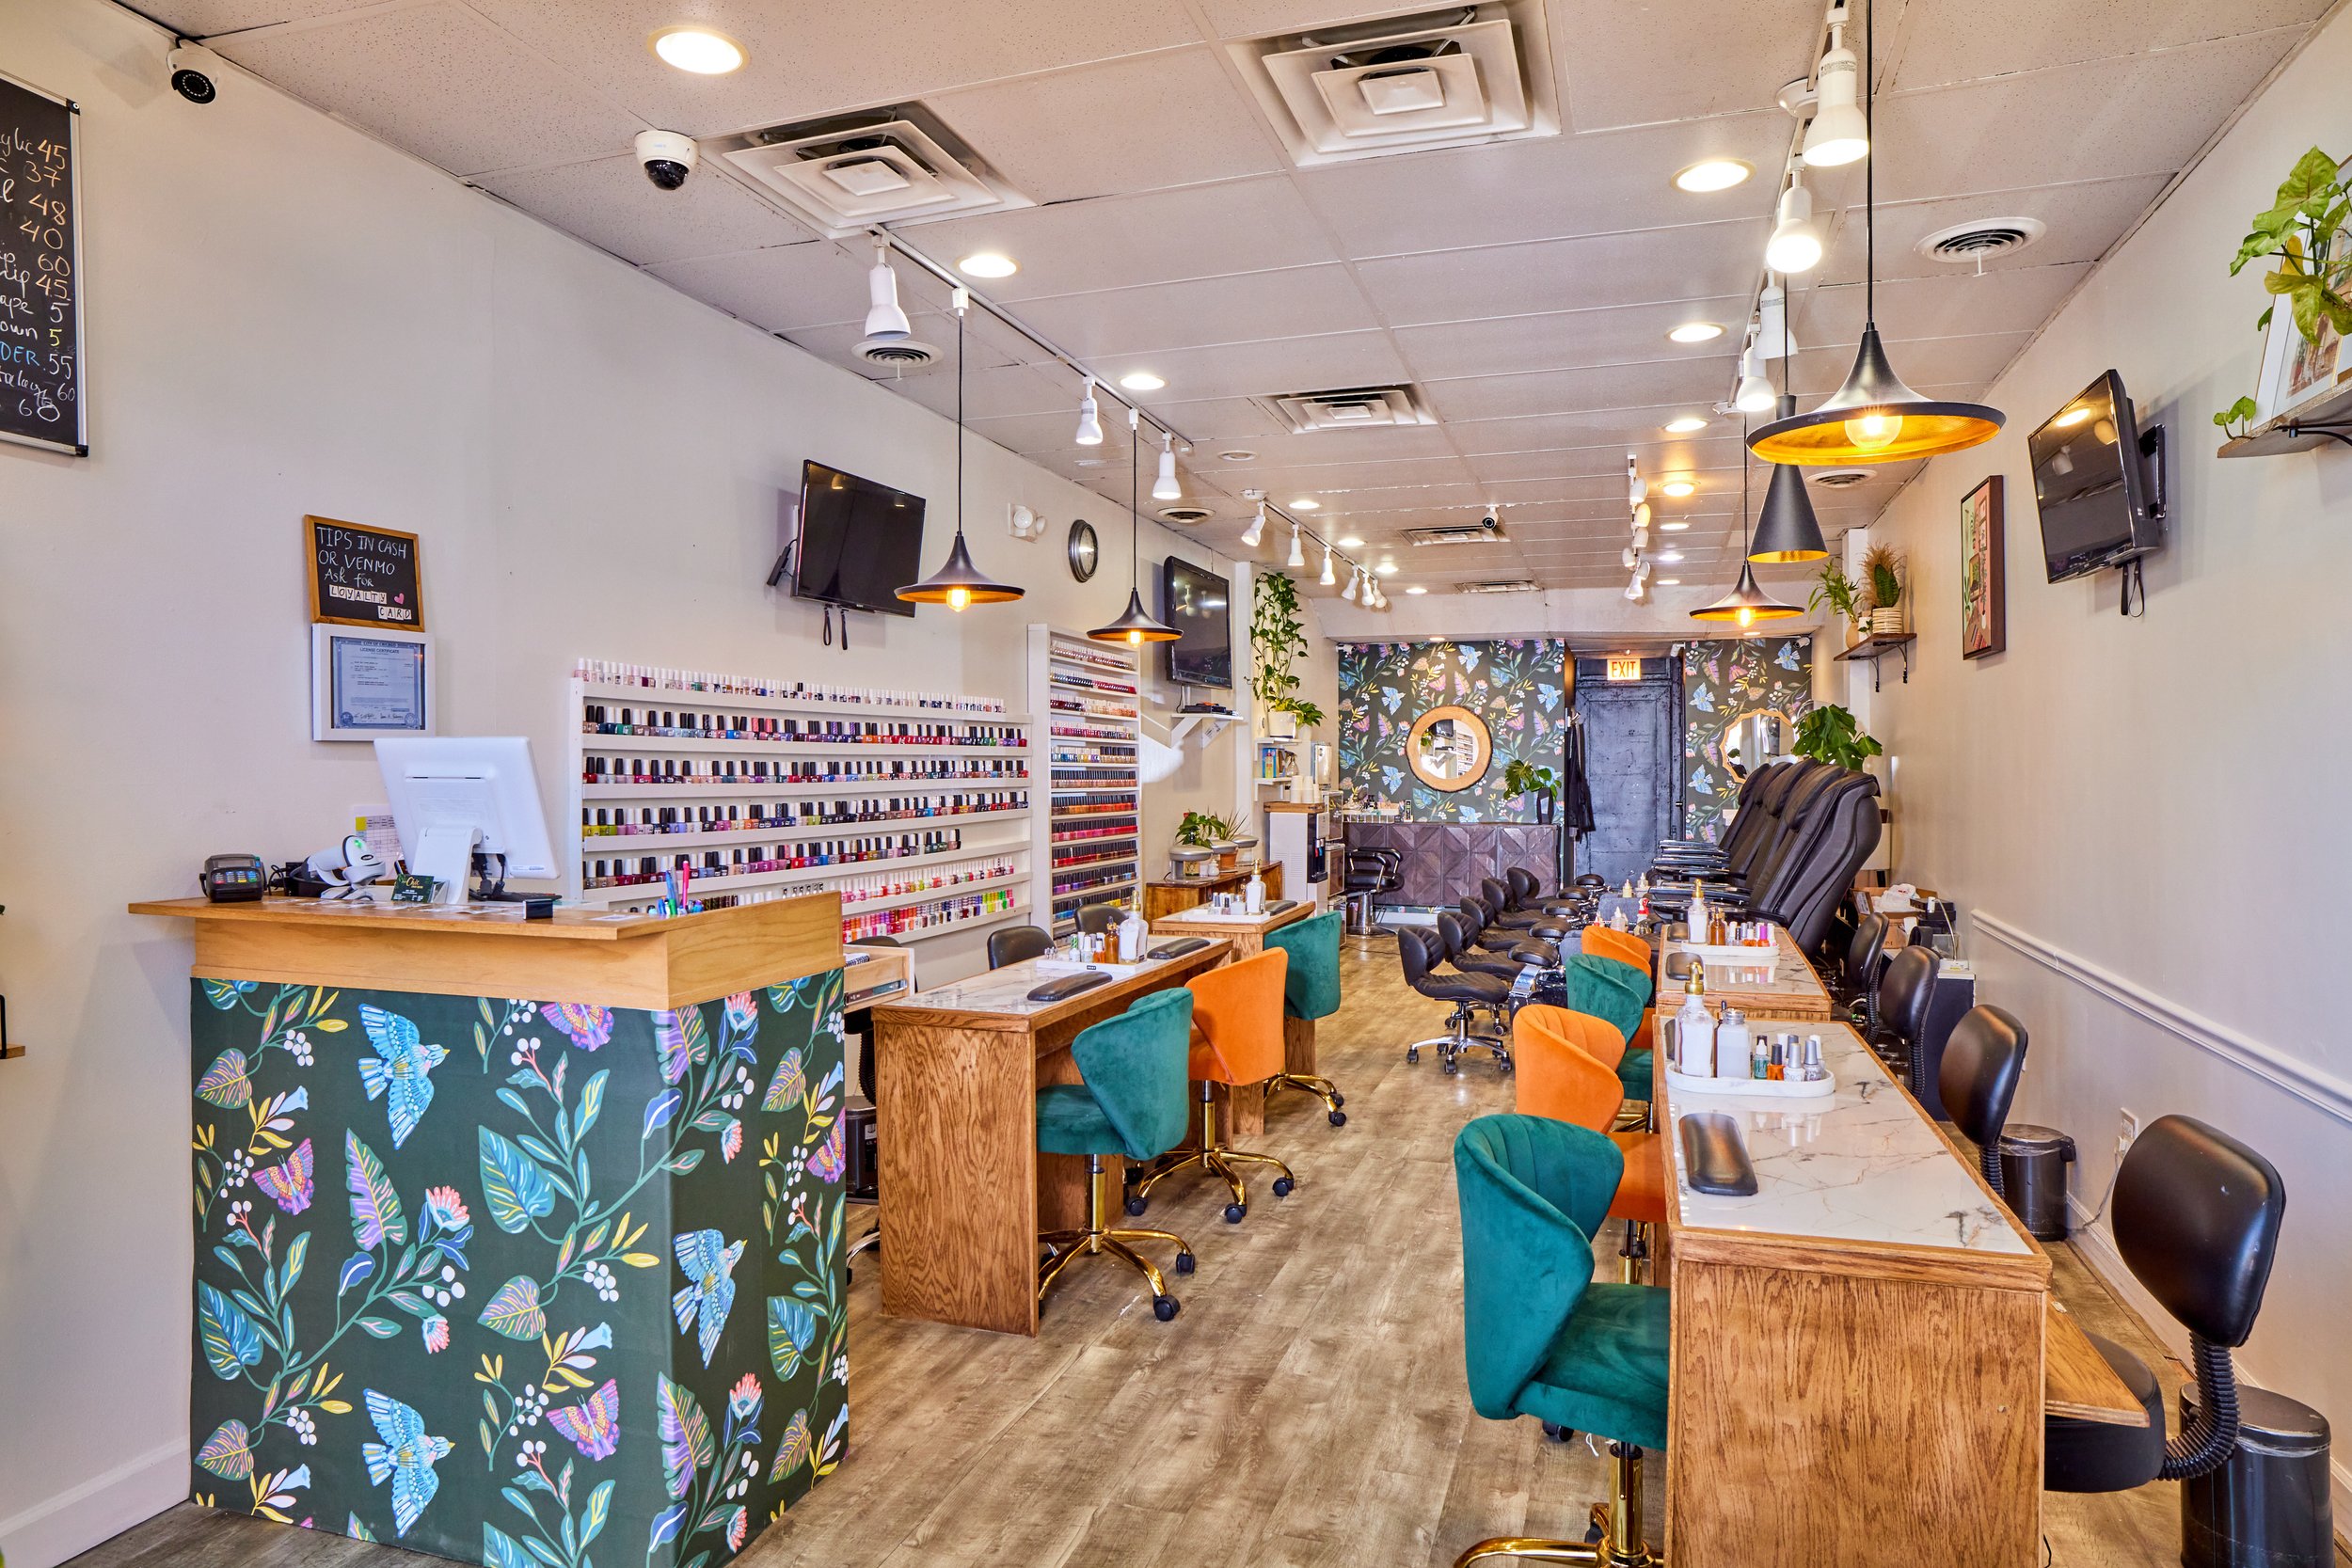 Perfect 10 (Nail Salon) - Opening Times, Contacts - Nail salon in London